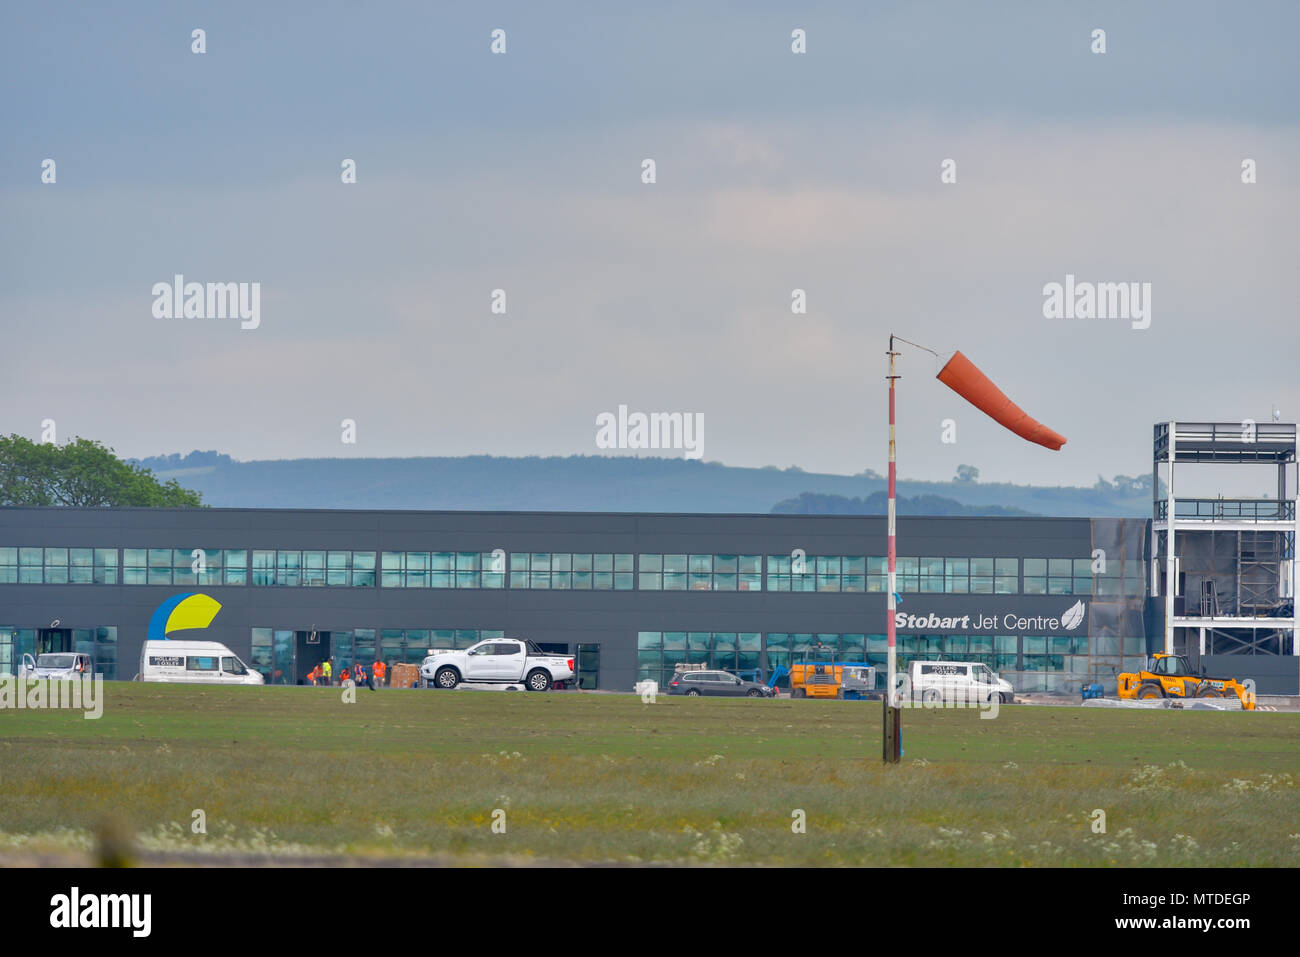 Carlisle, UK. 29th May 2018. First flights from Carlisle Lake District Airport postponed. Work continues on the new airport terminal building. Just days away from the departure of the for commercial flight from the airport since the 1980's, the services operated by Scottish airline Loganair have been postponed until September.   Photography 20 Credit: STUART WALKER/Alamy Live News Stock Photo